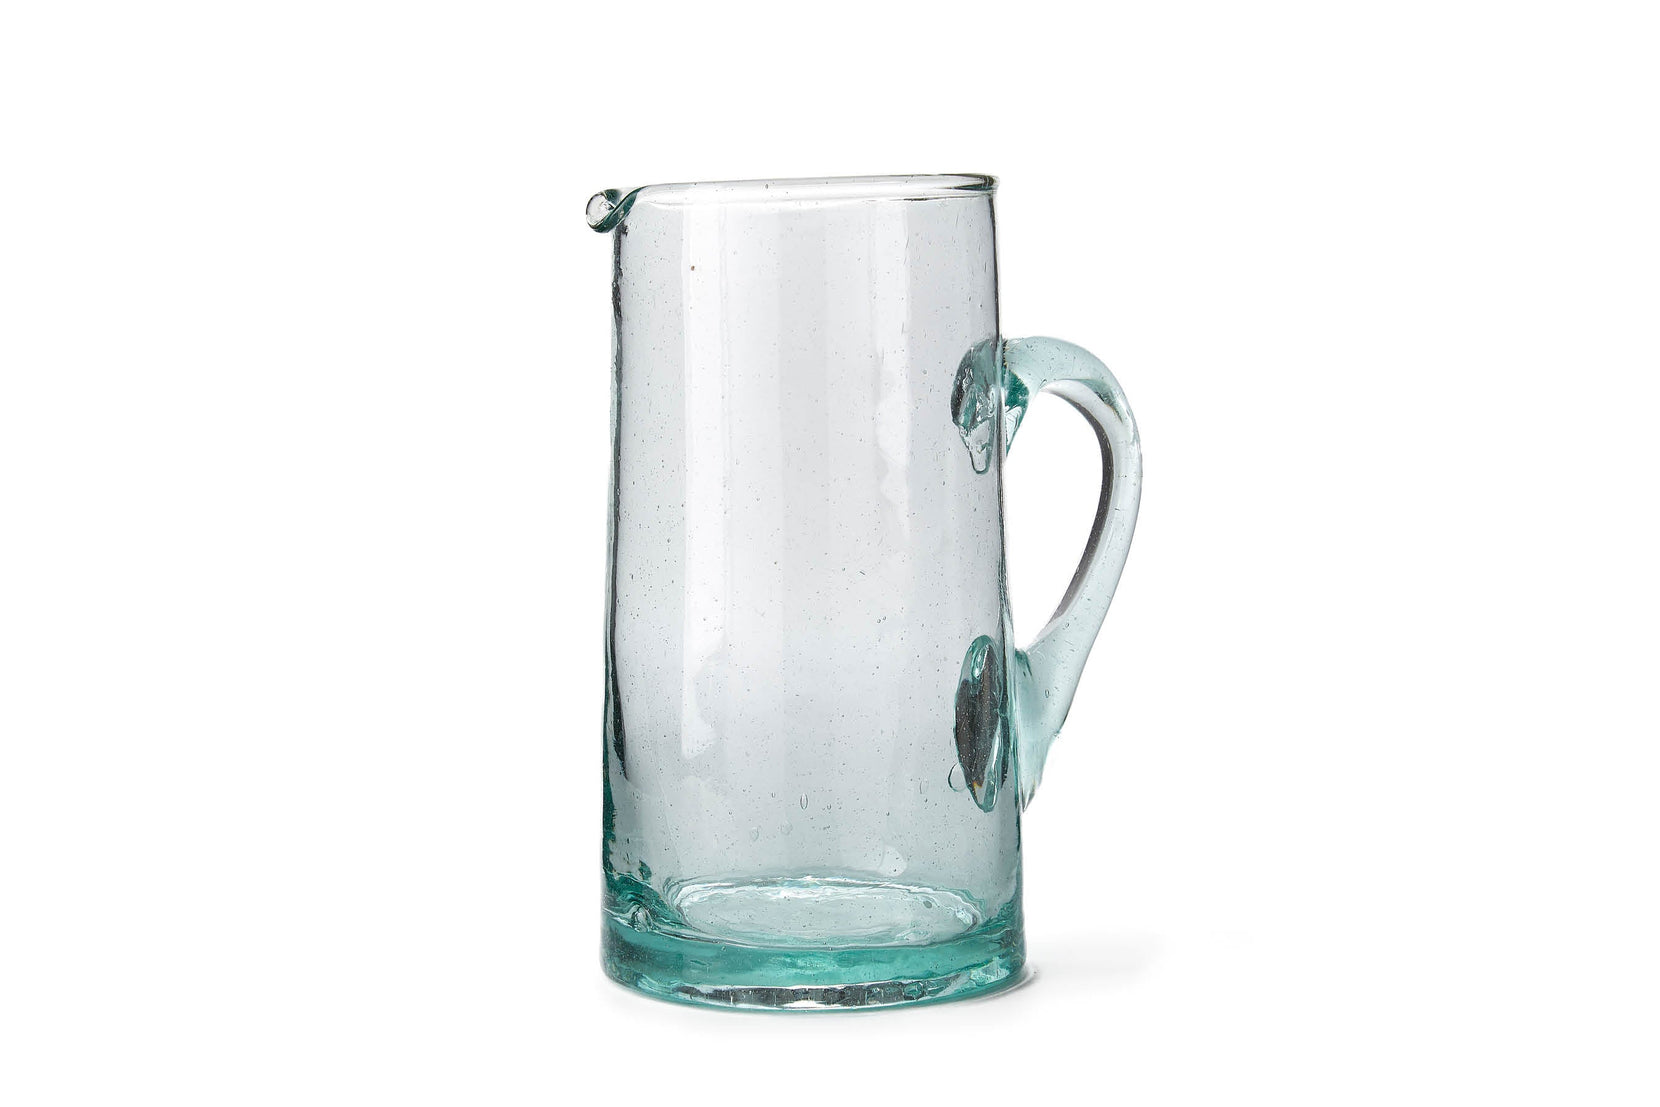 https://www.revivalrugs.com/cdn/shop/products/1-MOR-GW-E36-1ove-glass-water-pitcher-with-handle.jpg?format=pjpg&v=1653088359&width=1660